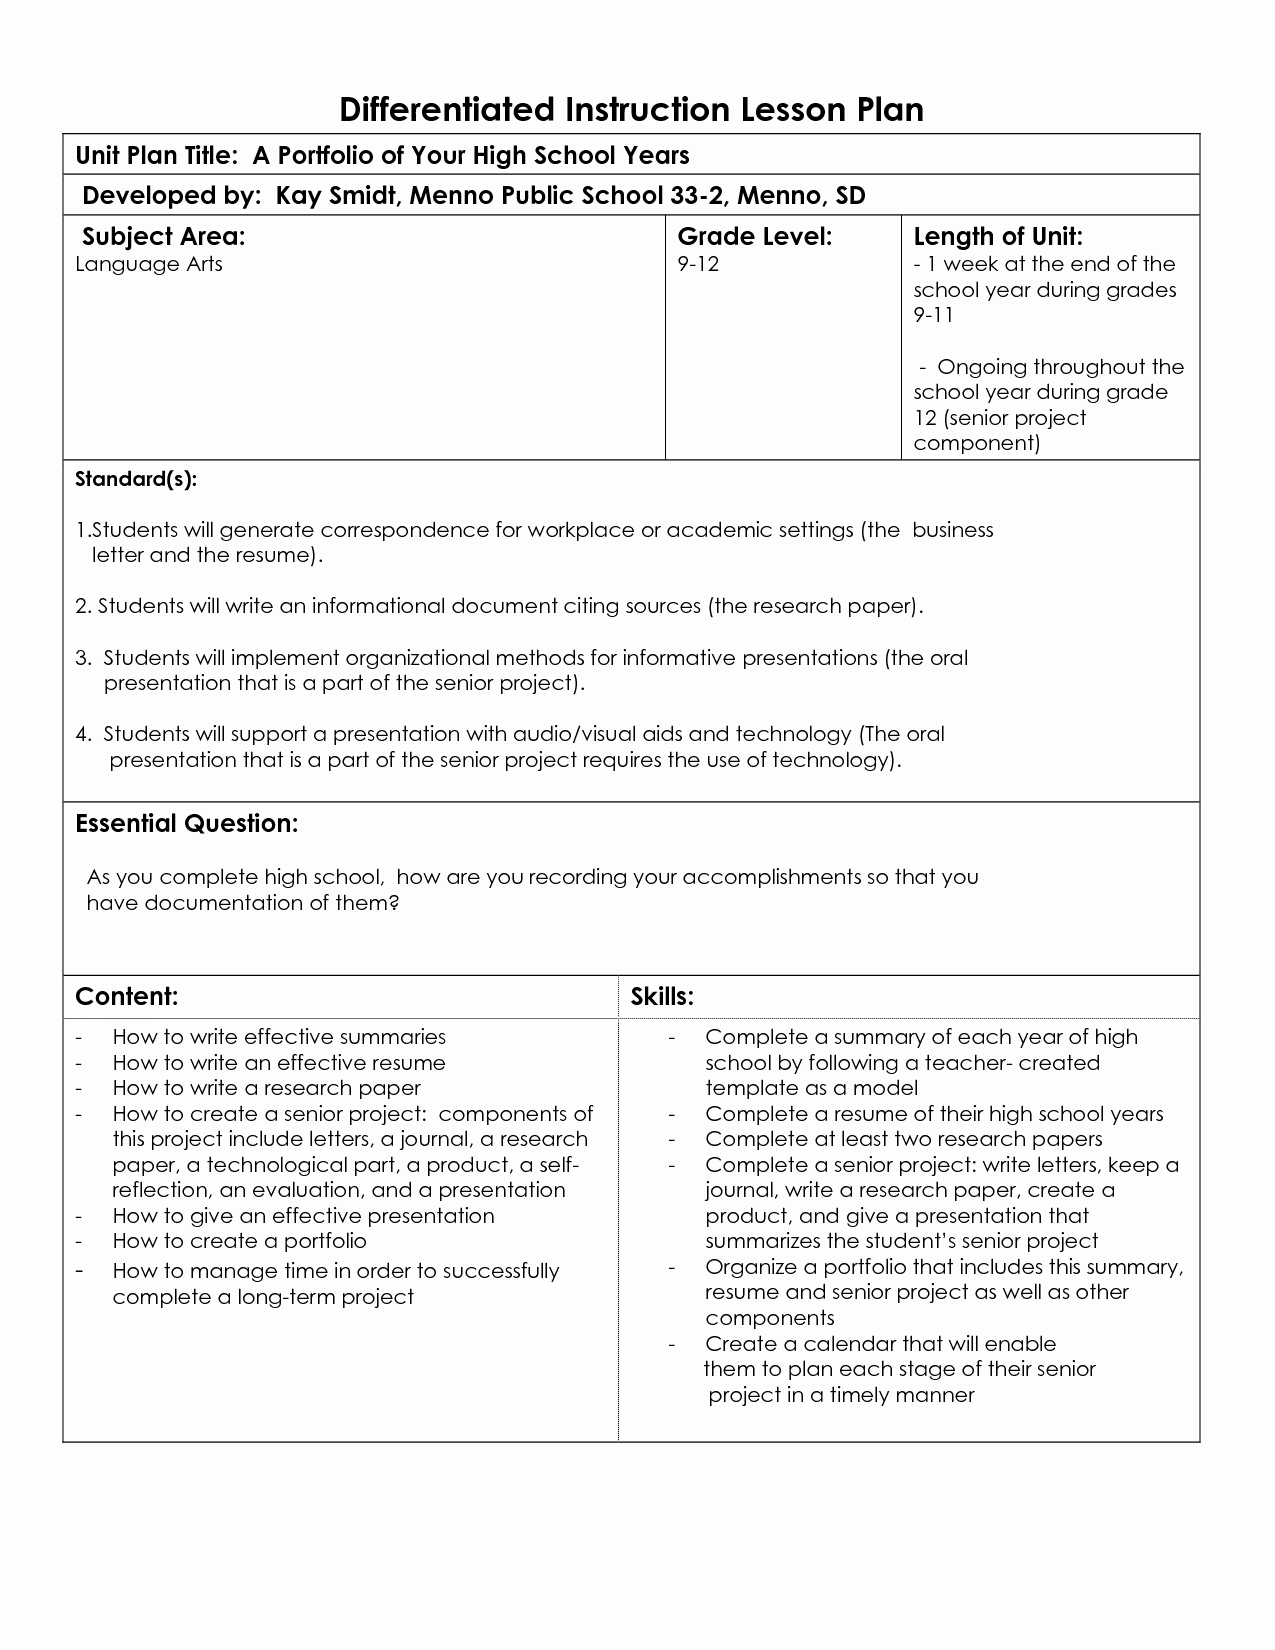 Differentiated Lesson Plan Template Fresh Differentiated Instruction Lesson Plan Template 1954